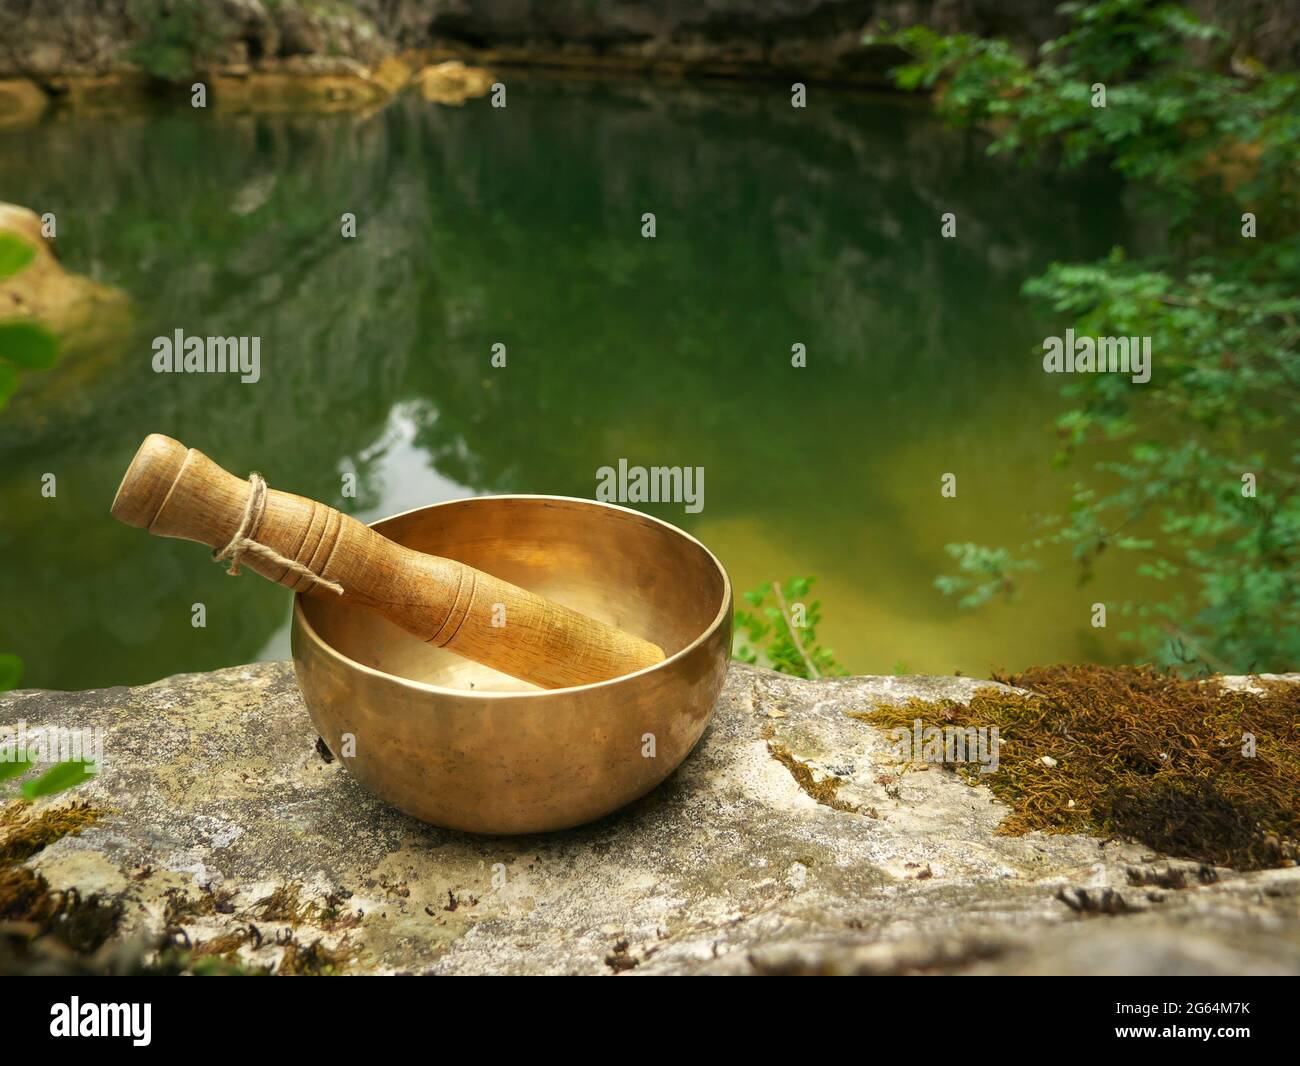 Metal singing bowl for relaxing and receiving healing vibrations Stock Photo